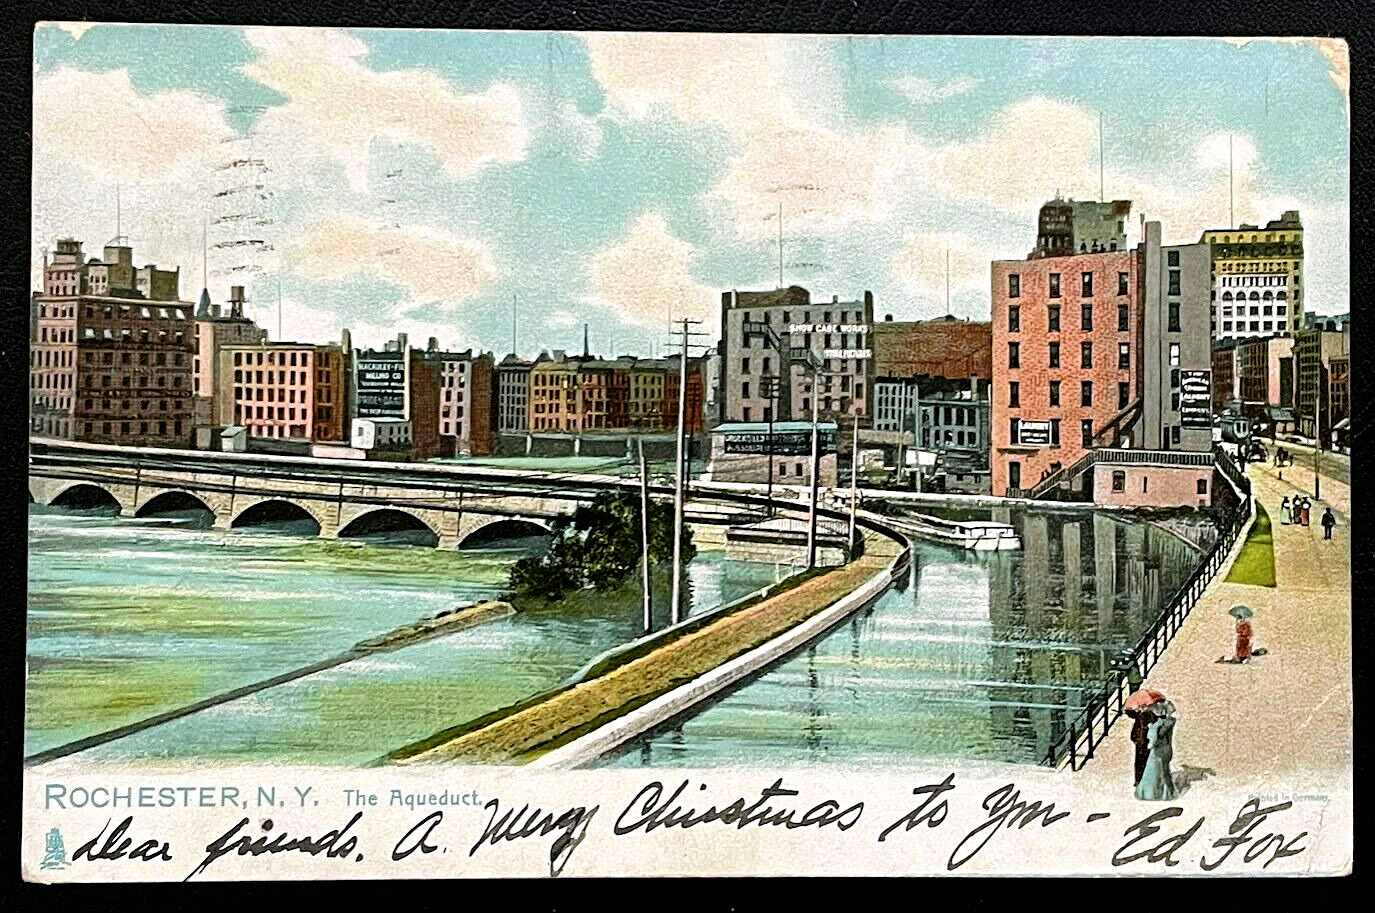 Rochester New York Antique Postcard Postmarked 1906 Picture Image Mailing Card